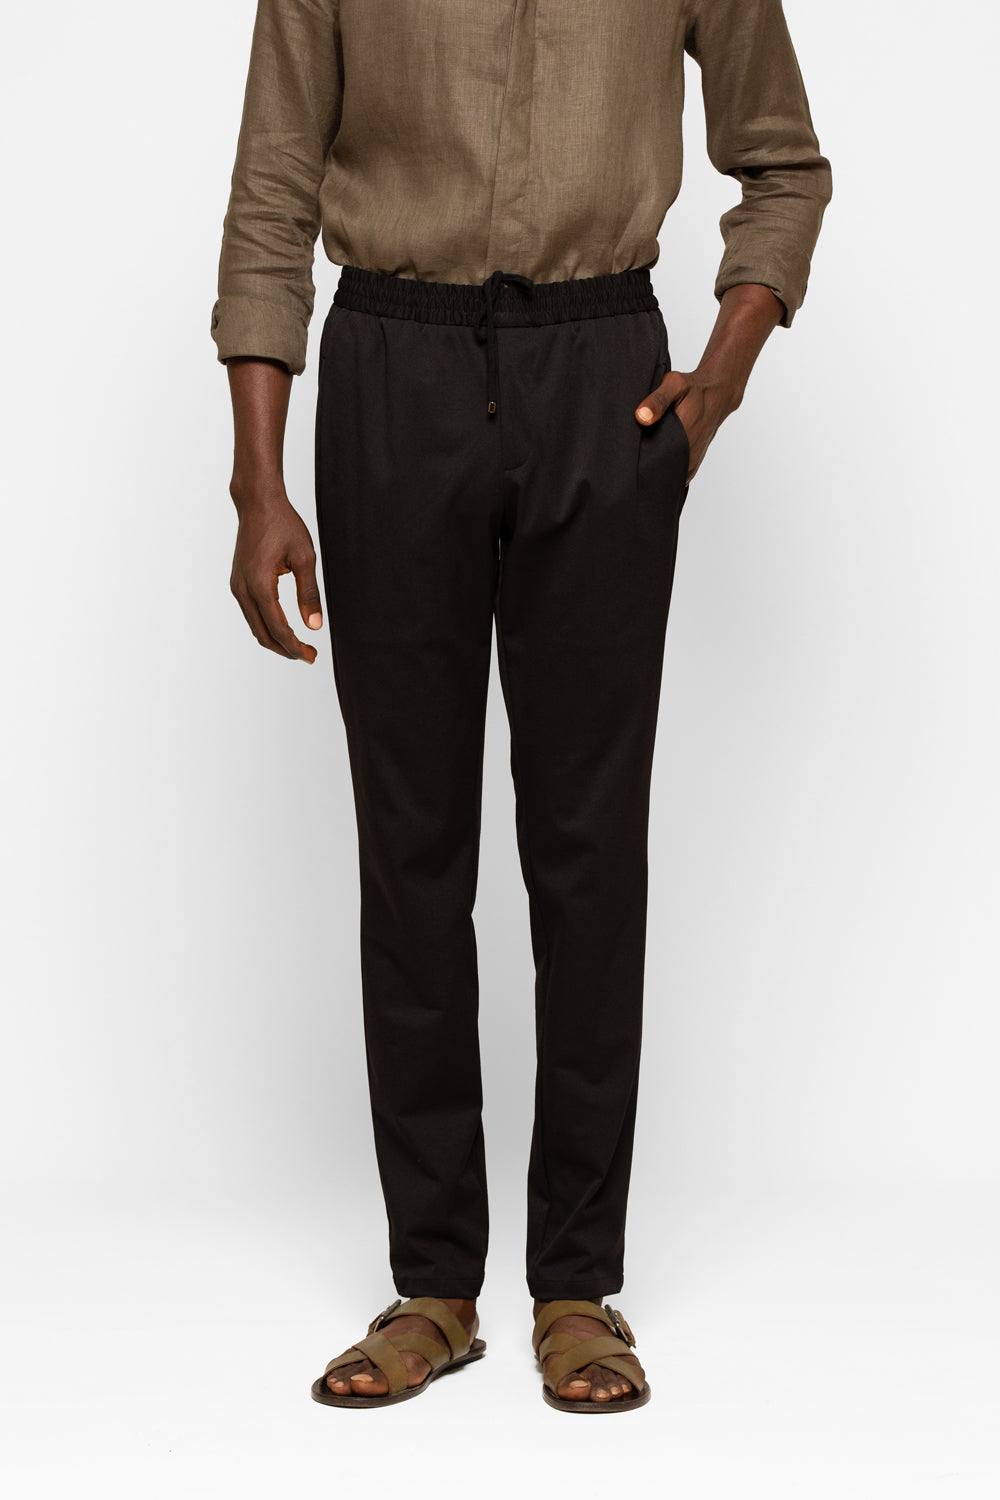 Loewe Drawstring Trousers In Cotton in Green for Men | Lyst